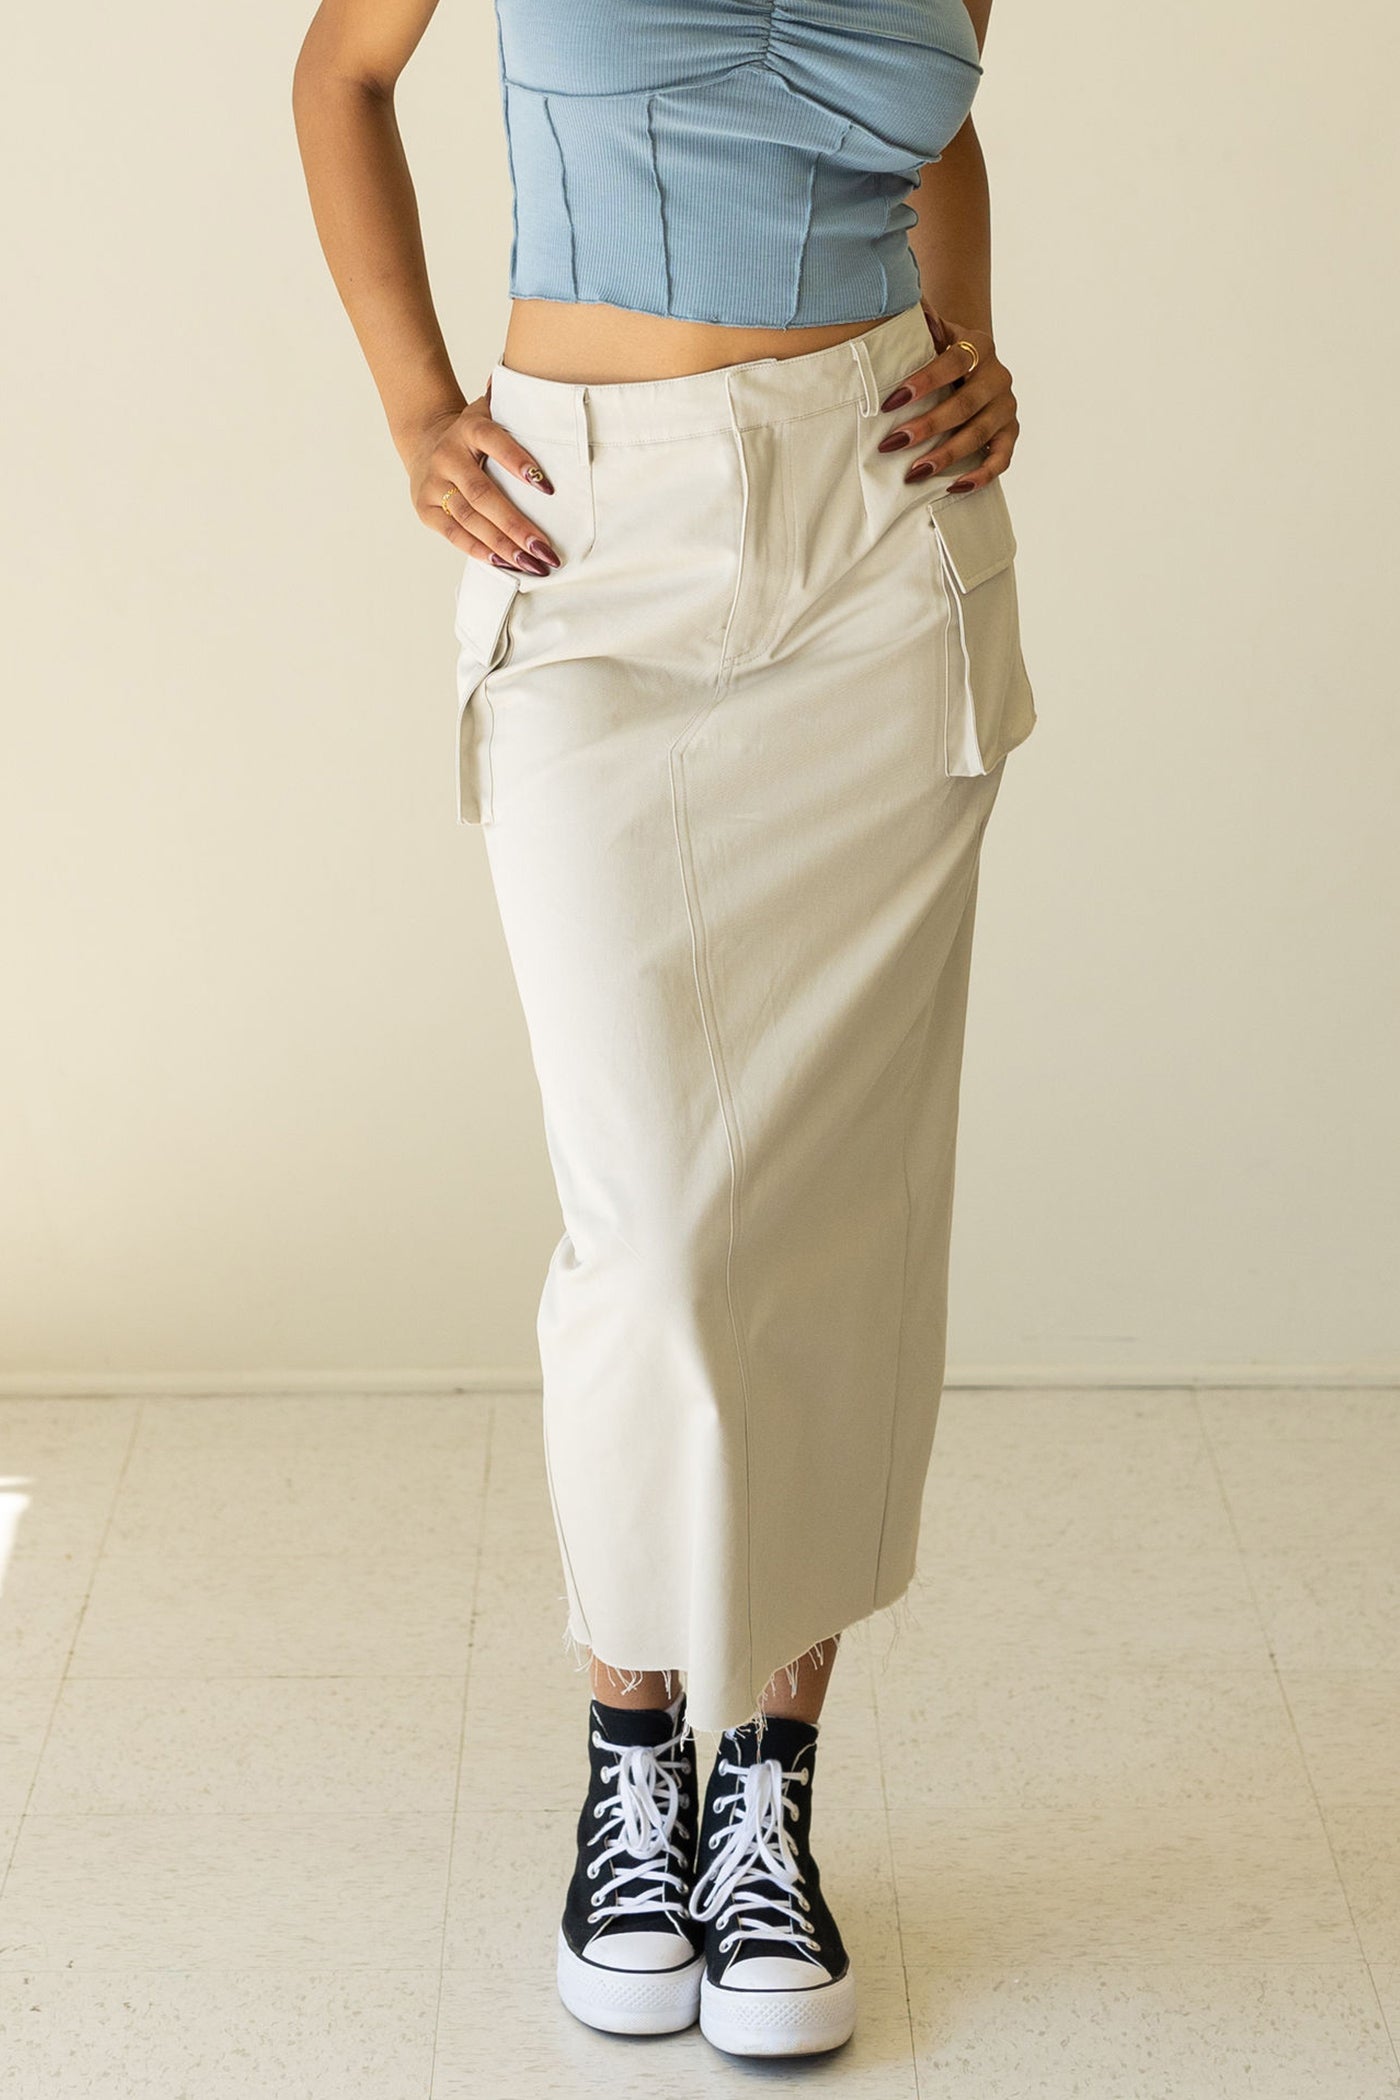 Knowing You Midi Skirt by For Good